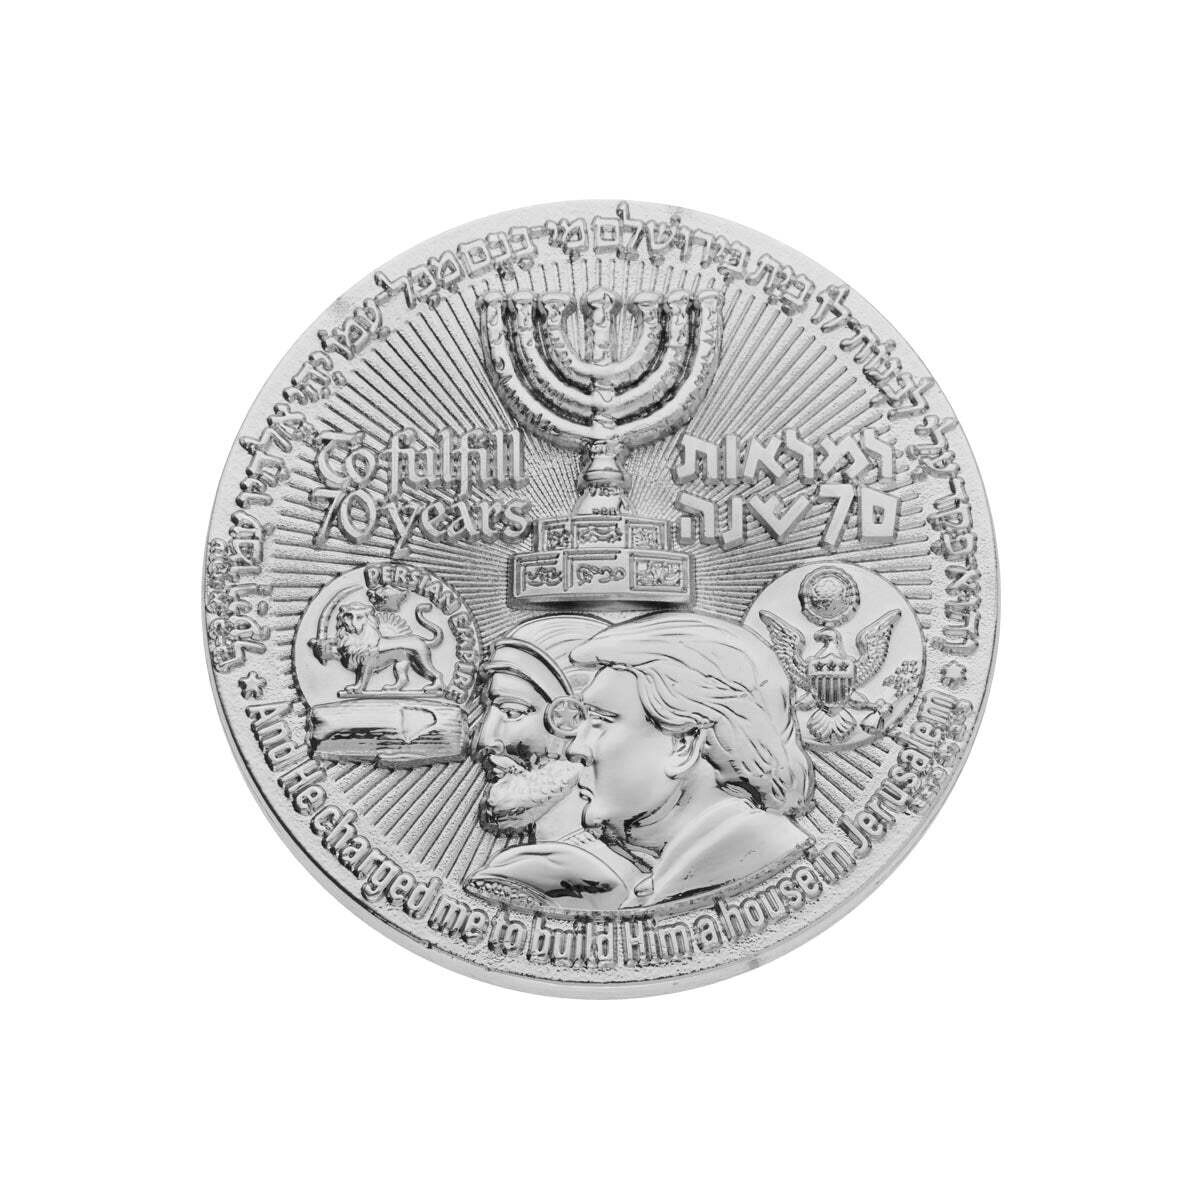 The 70 Years Israel Redemption - Temple Coin 999 Silver Plated